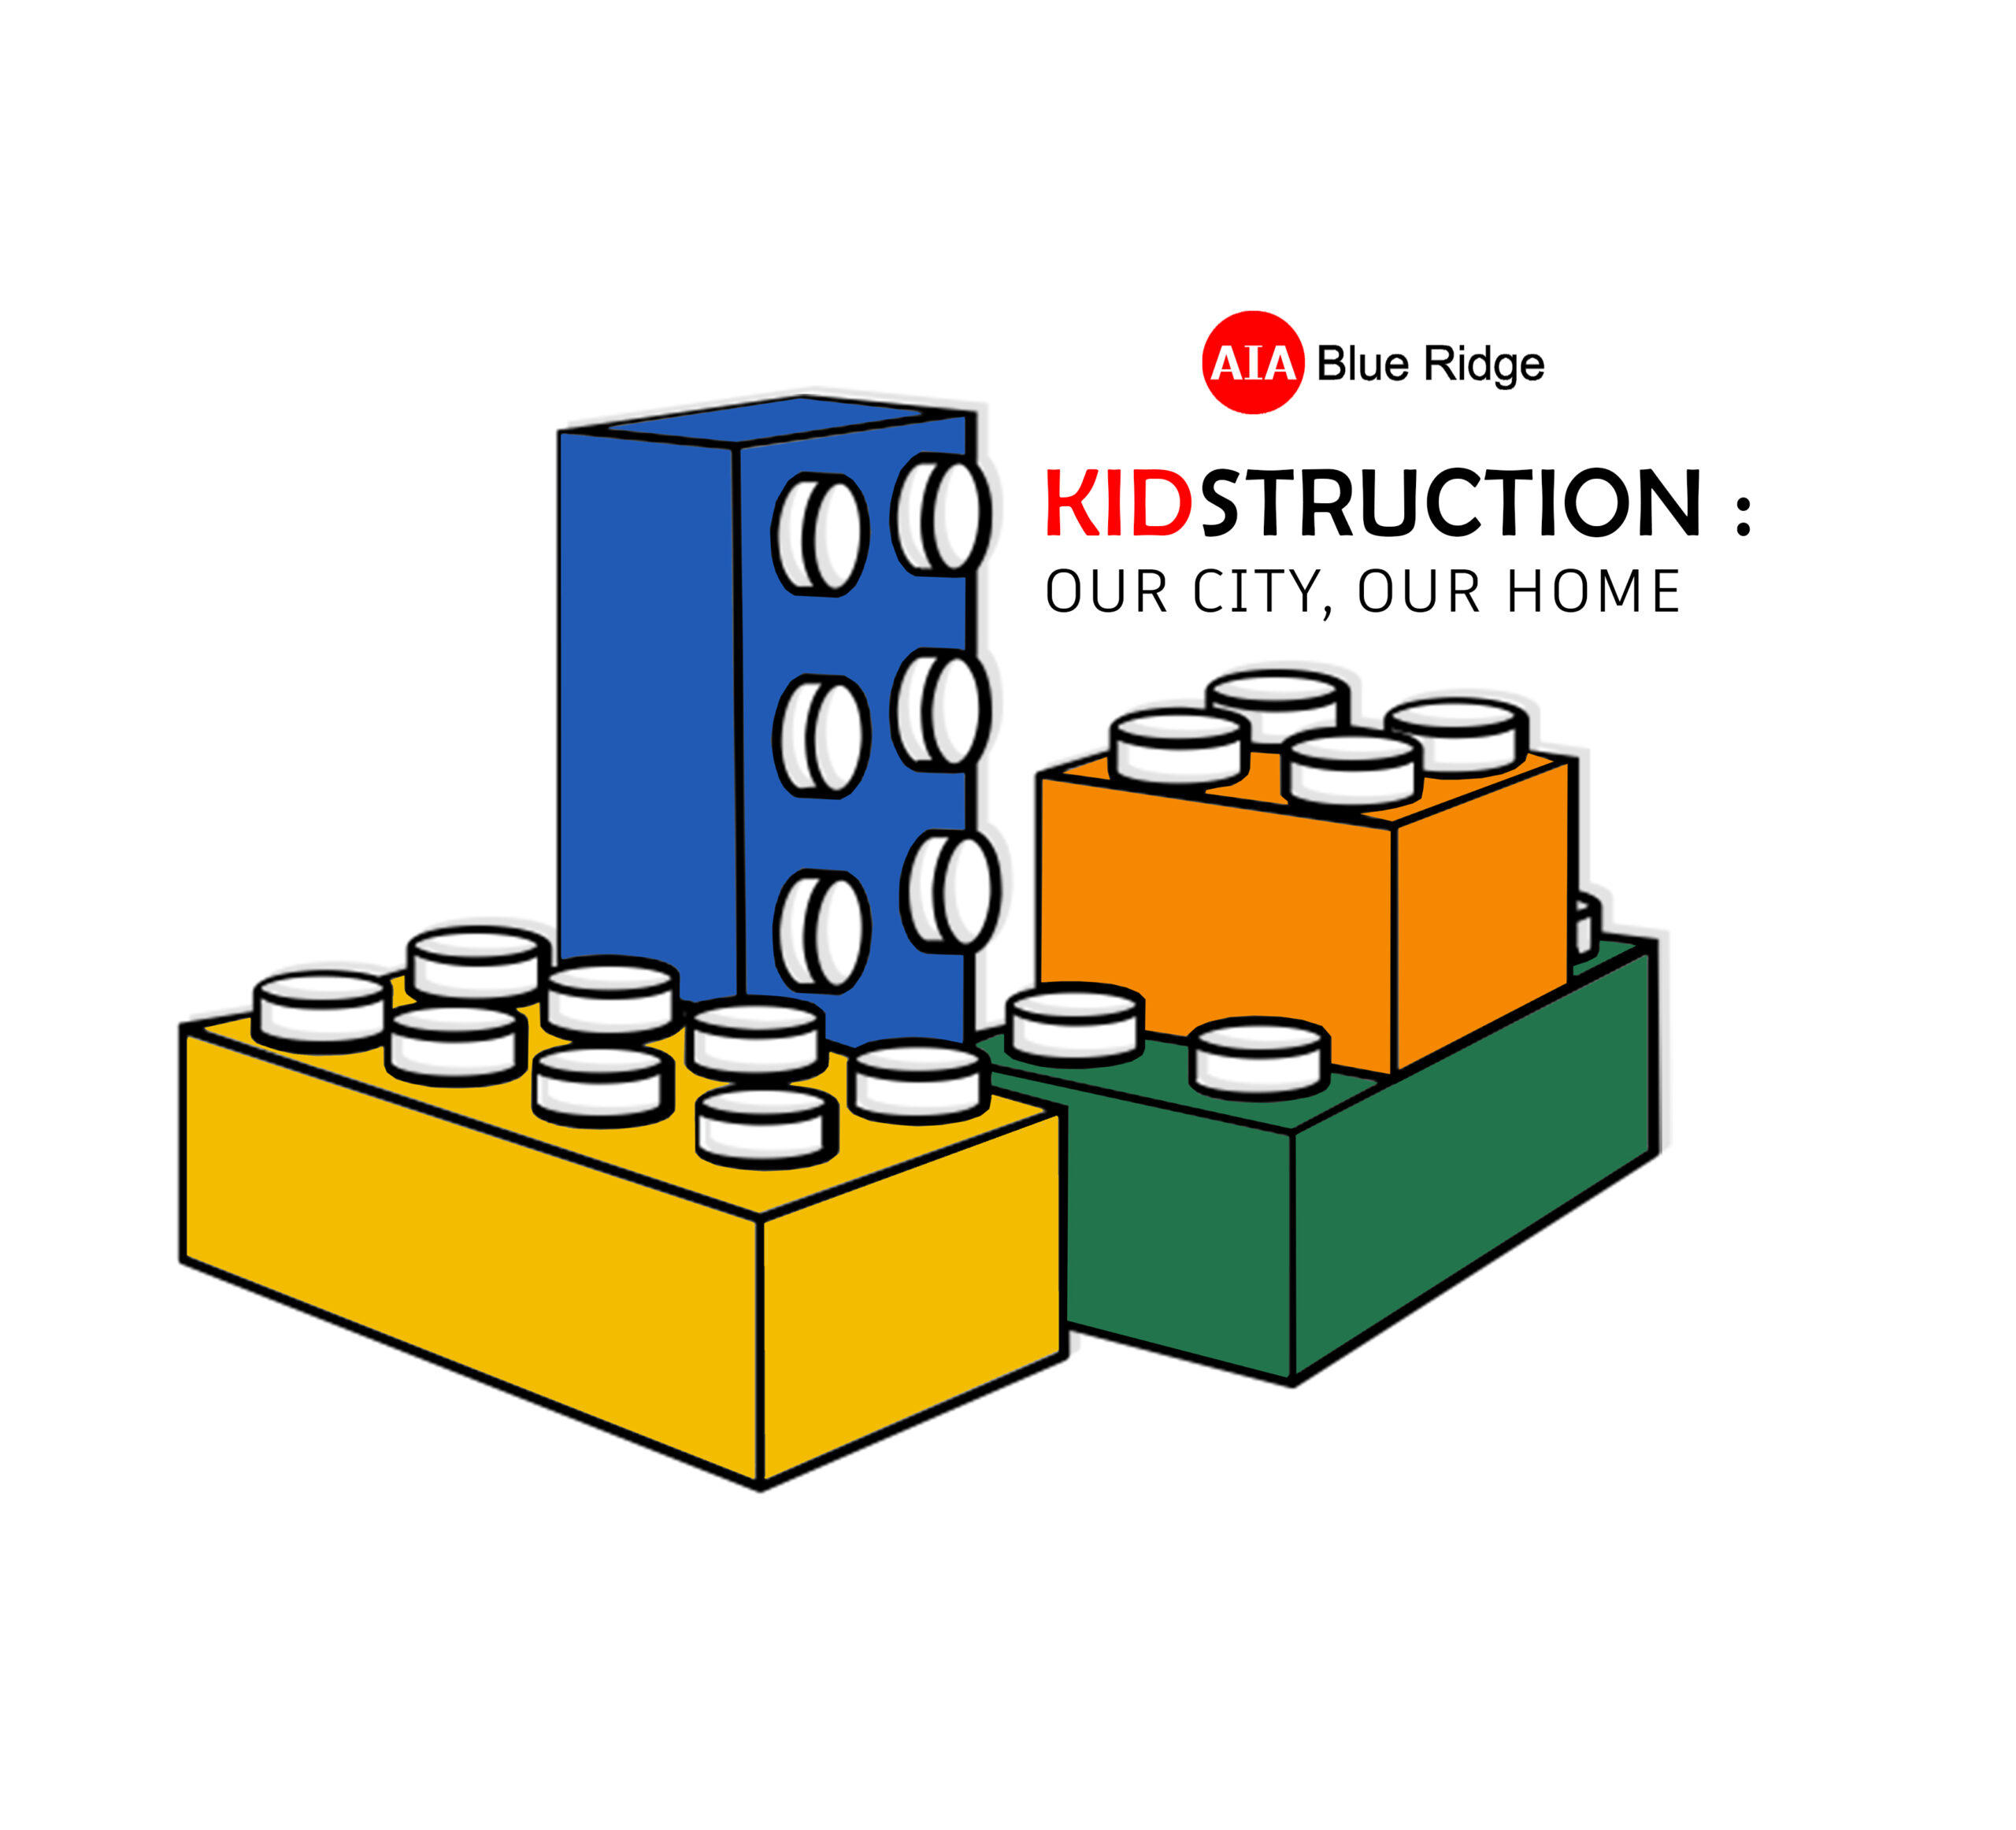 American Institute of Architects Blue Ridge Presents: Kidstruction – Our City, Our Home